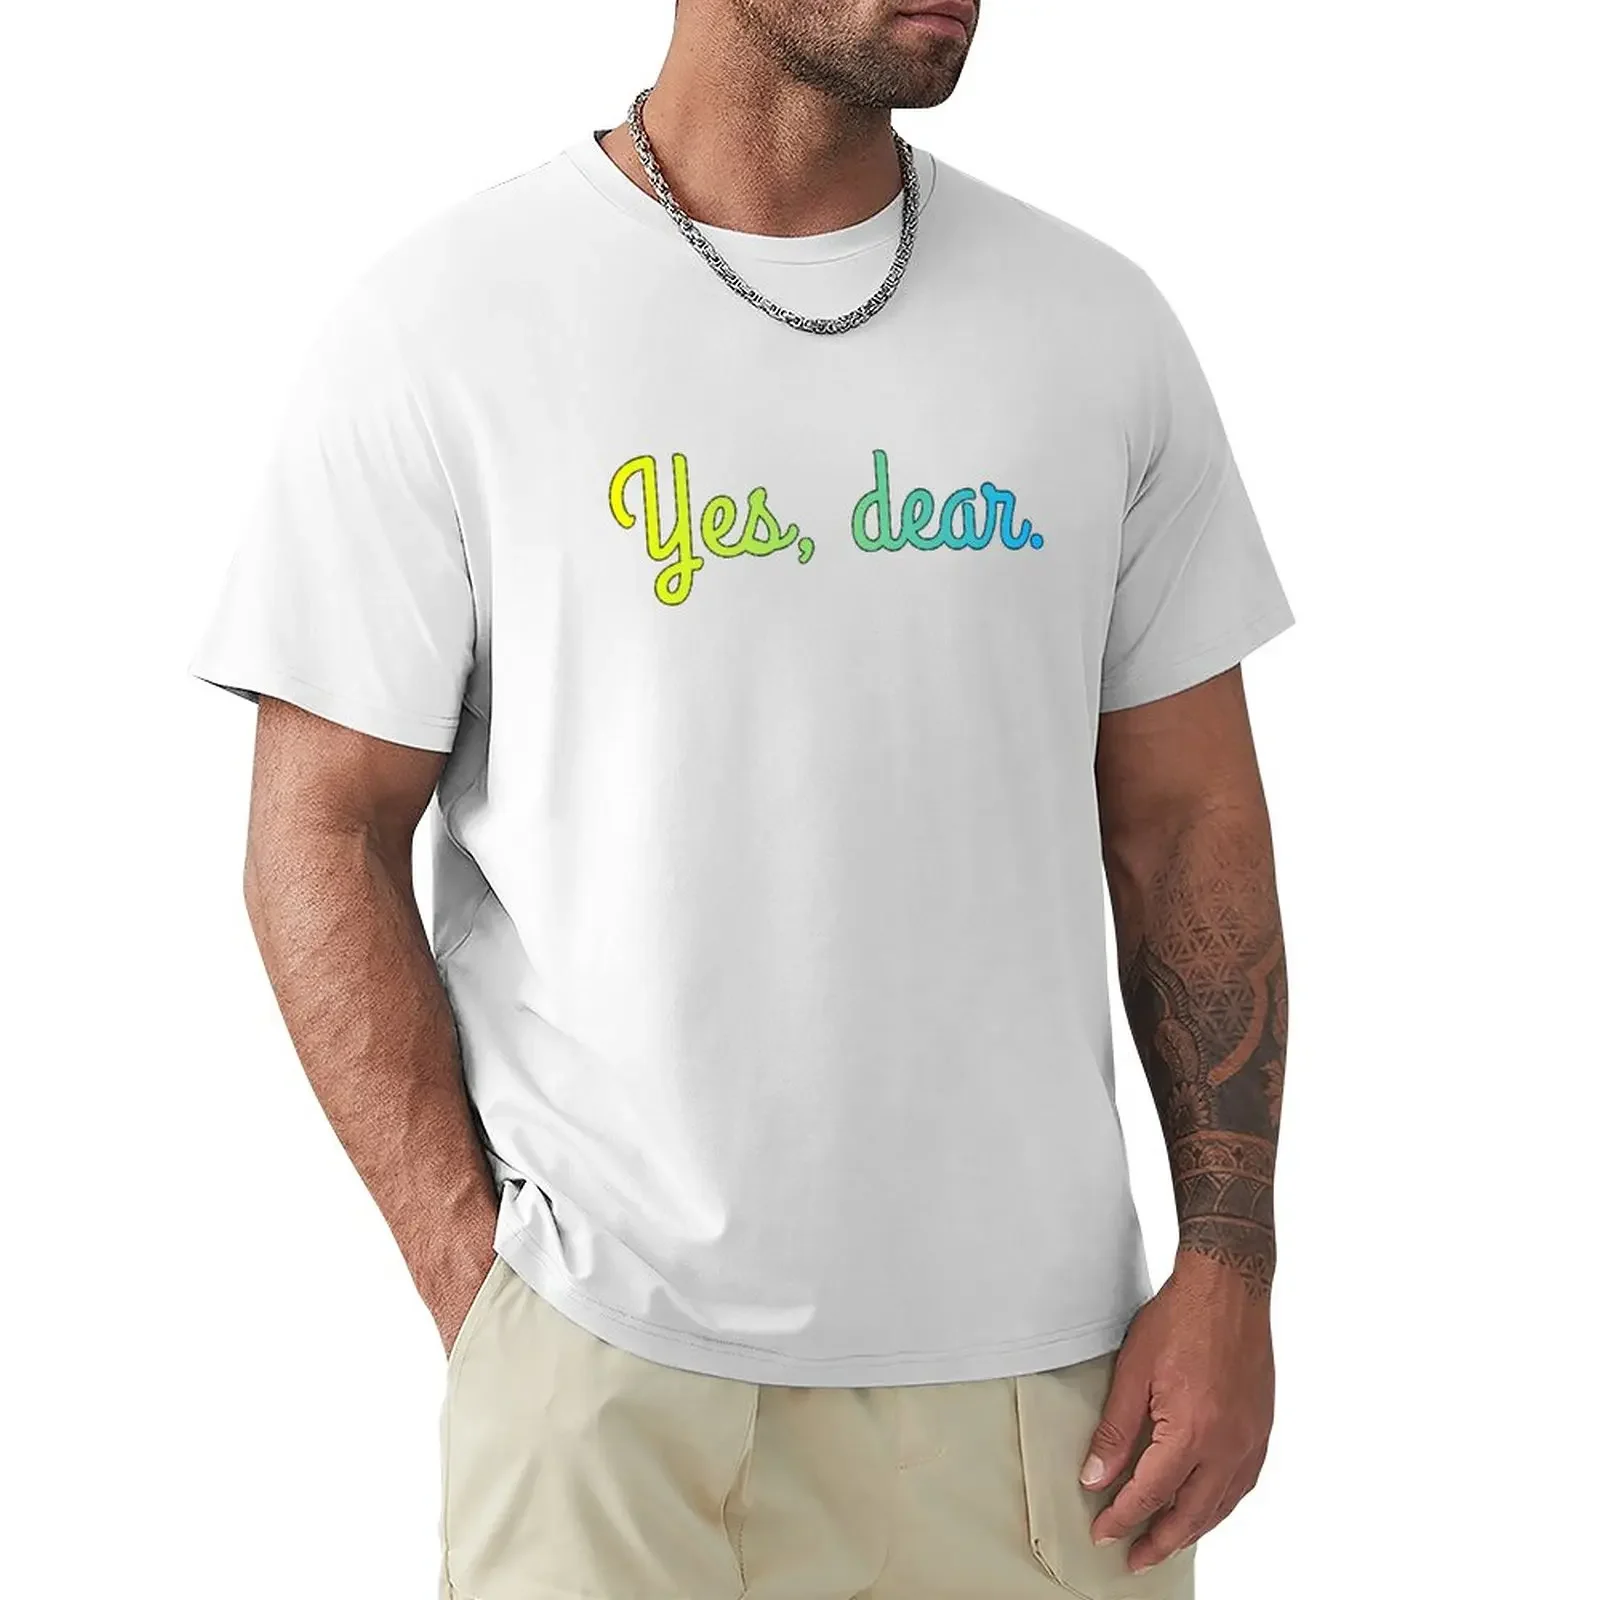 

Yes, dear. T-Shirt tops new edition plus size tops mens graphic t-shirts hip hop